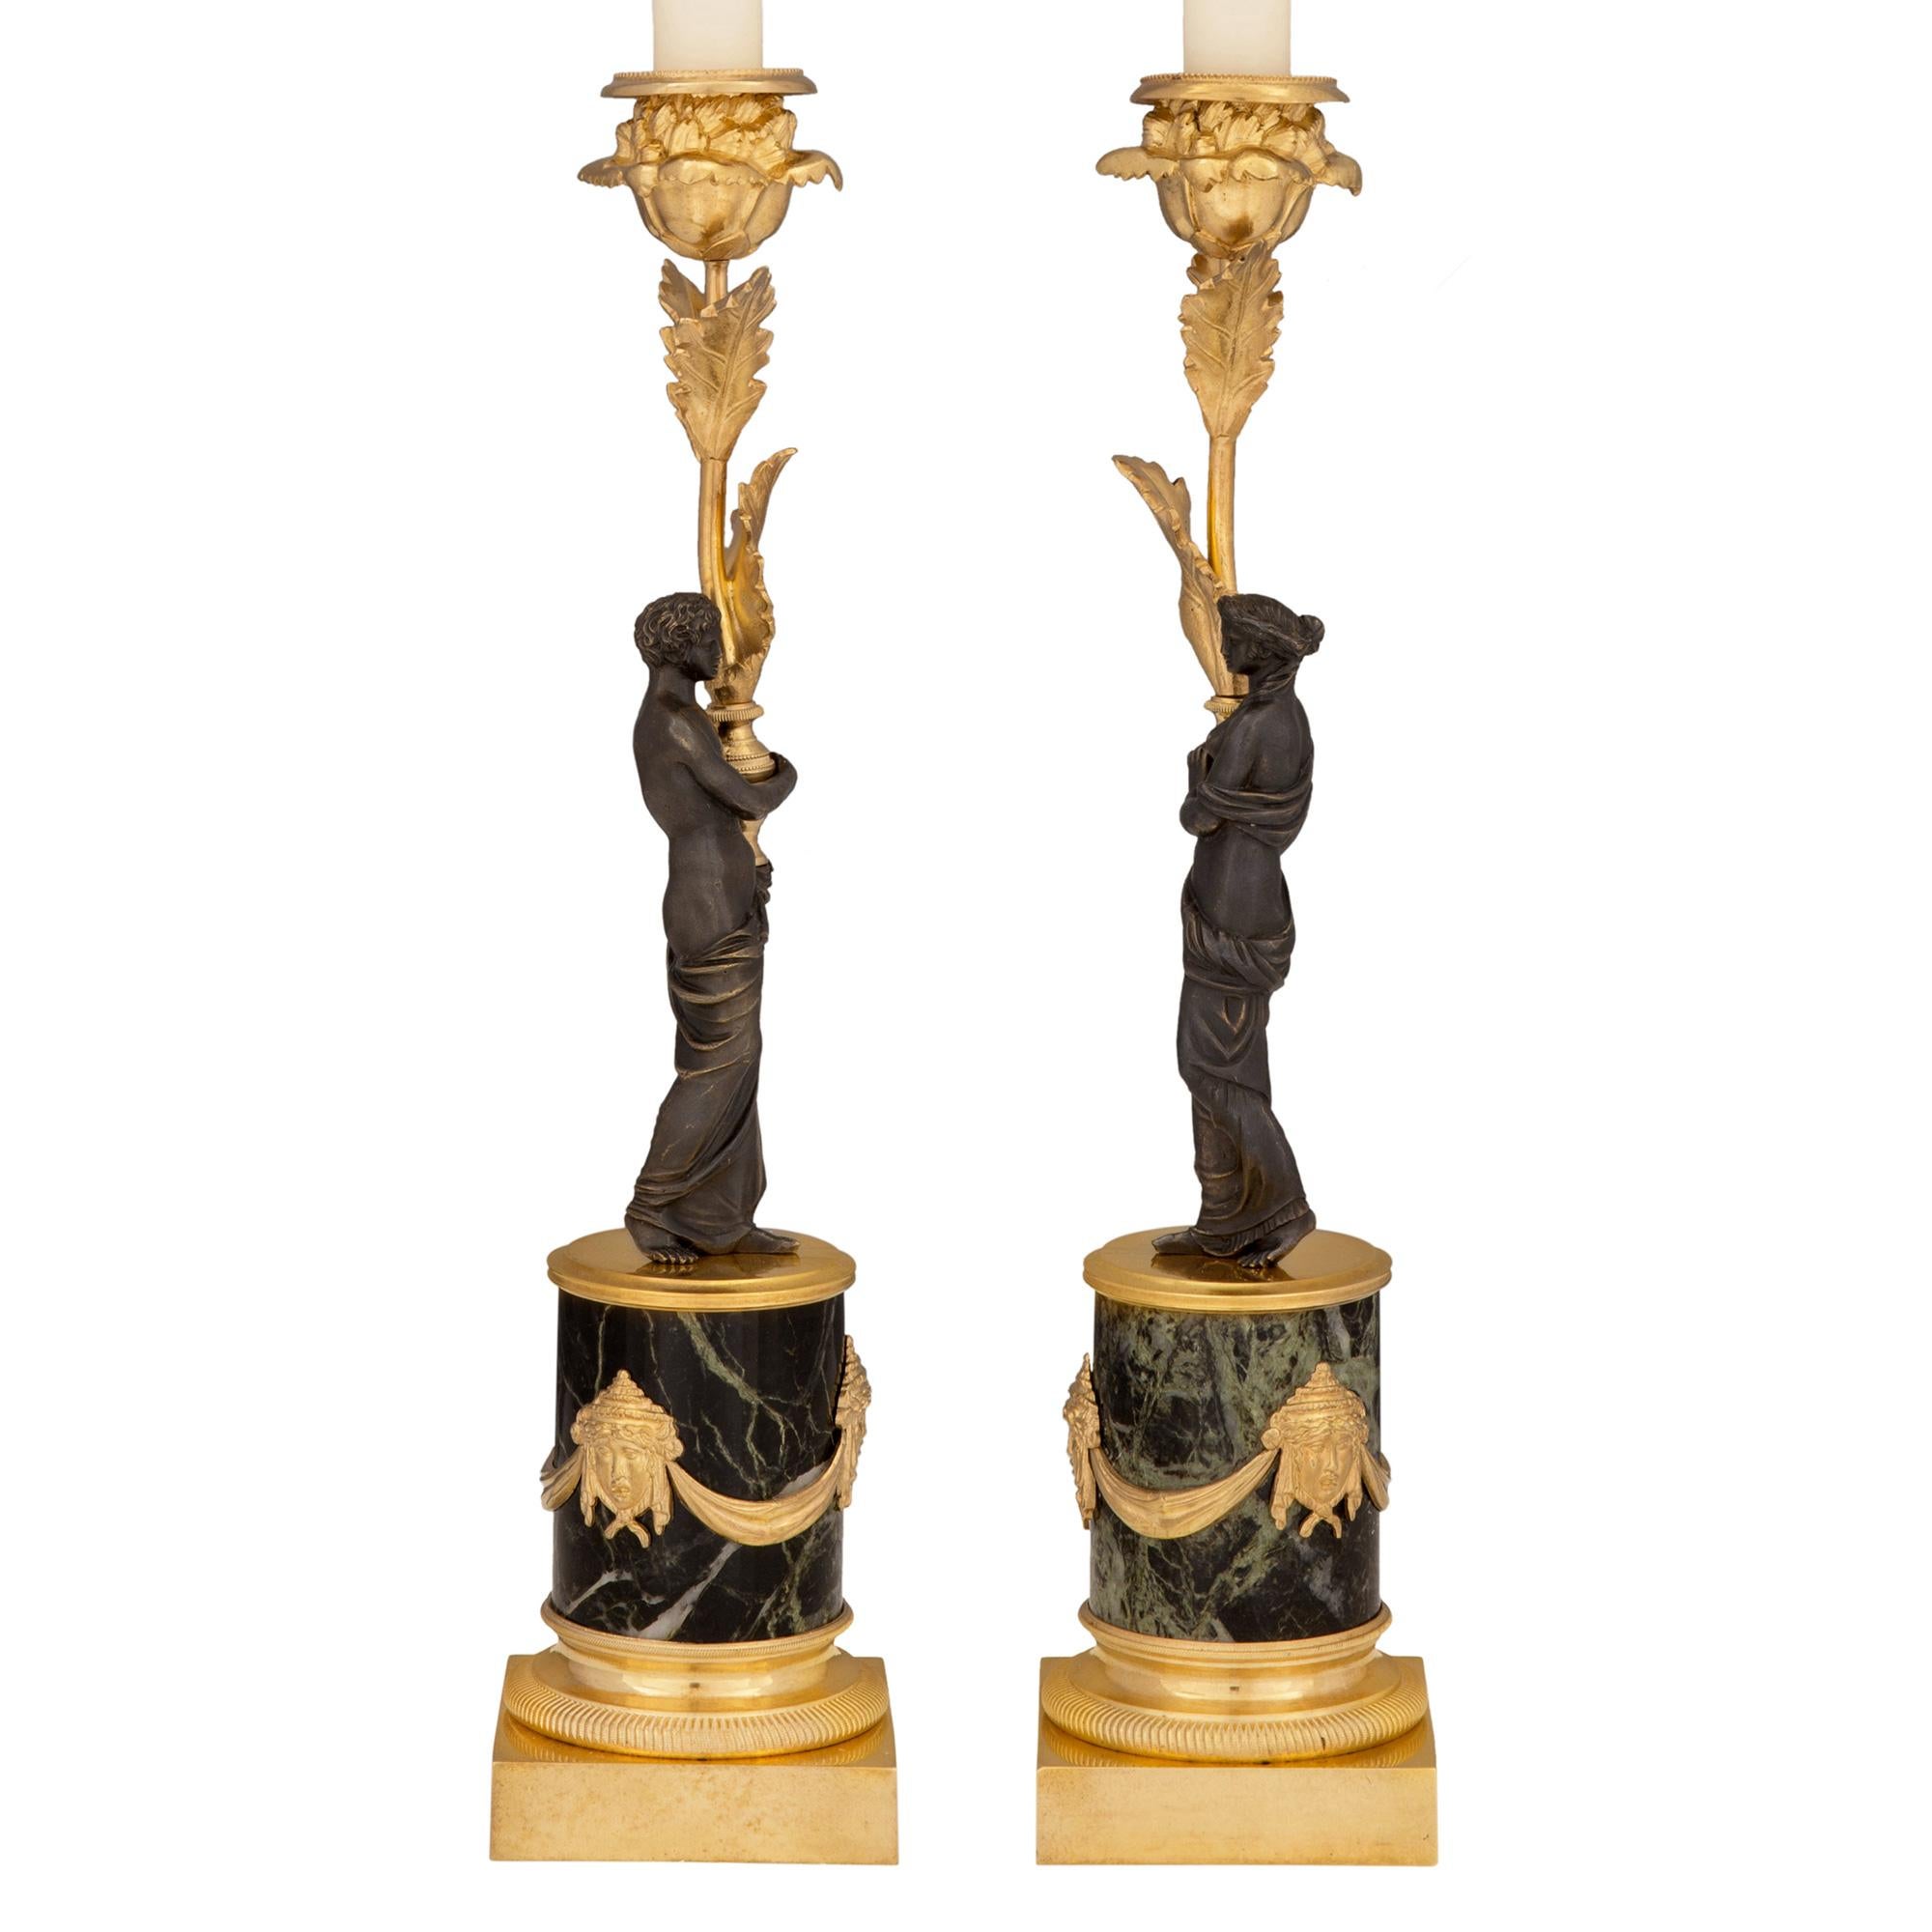 A striking true pair of French 19th century Louis XVI st. ormolu, patinated bronze and Vert de Patricia marble candlesticks. Each candlestick is raised by a square ormolu base, socle pedestal and a fine fluted wrap around band. The circular Vert de